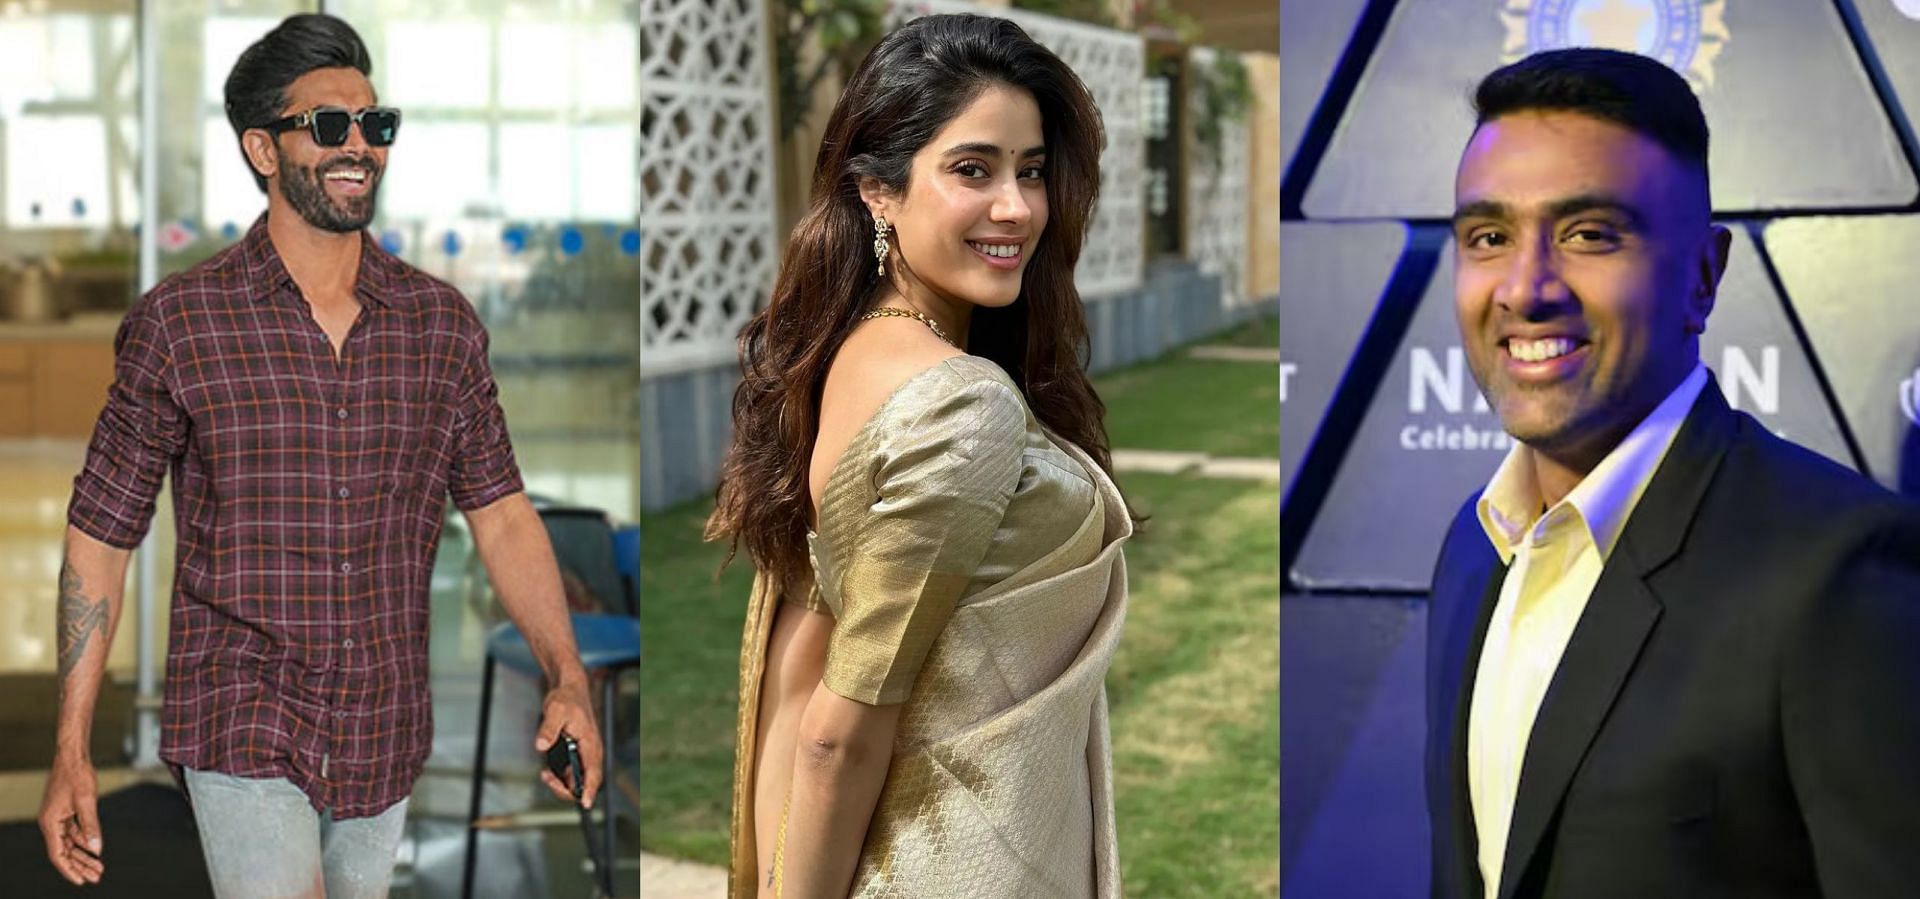 Indian cricketer Ravichandran Ashwin had a hilarious conversation with a parody account of actress Janhvi Kapoor on the social media handle 